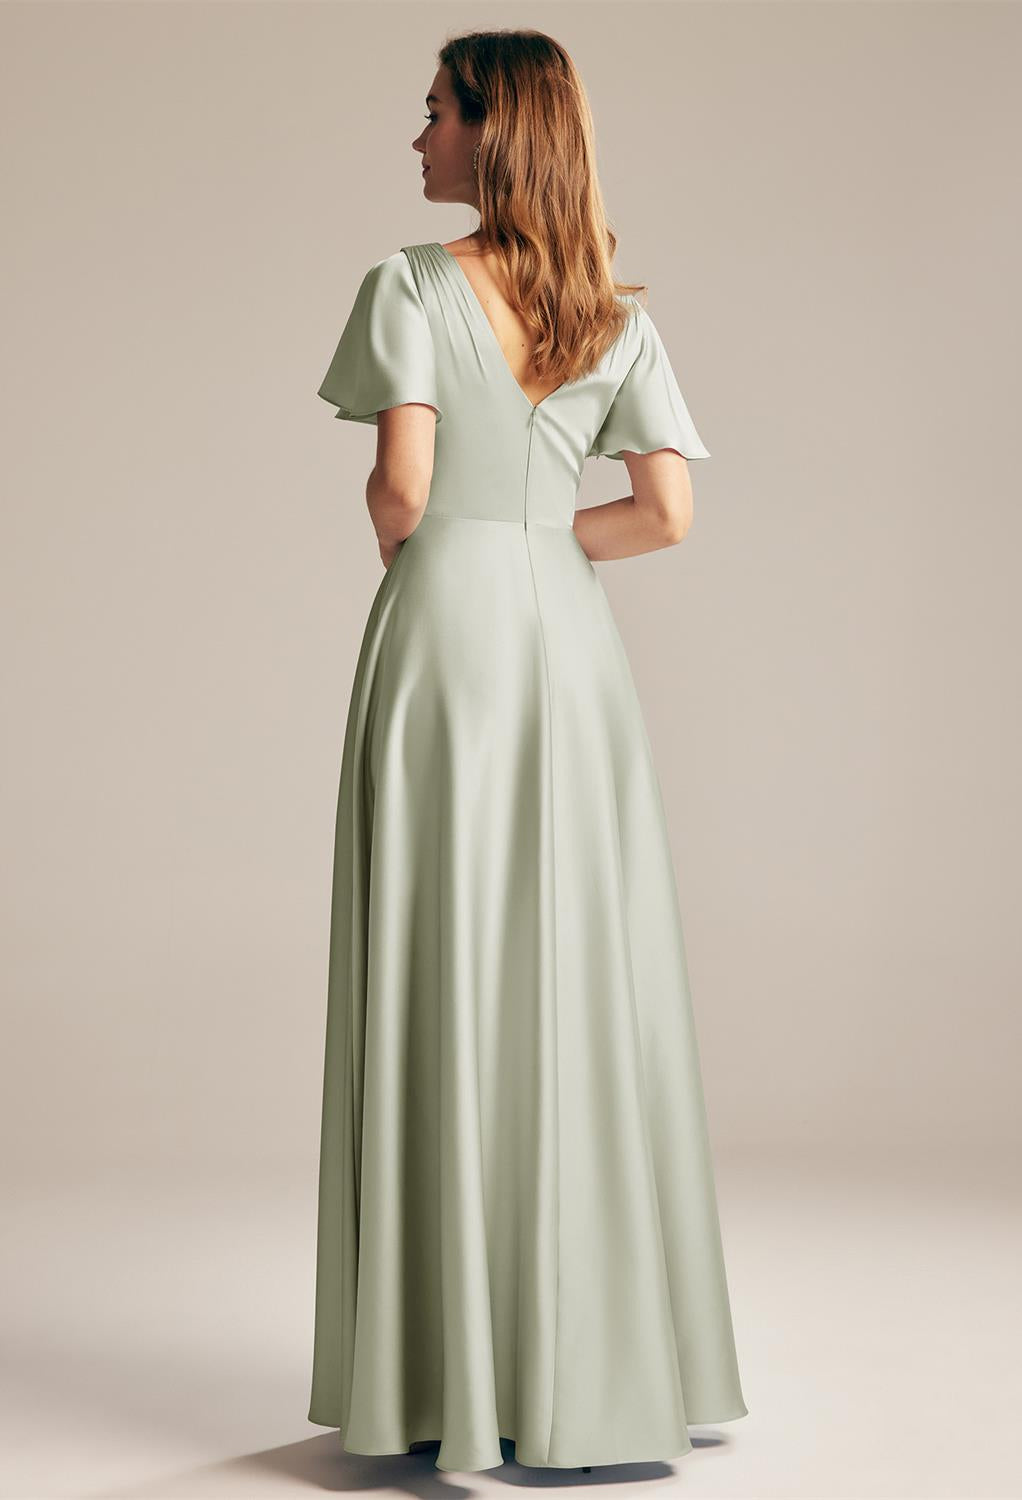 The back view of a woman wearing a Furst - Satin Charmeuse Bridesmaid Dress - Off The Rack in sage green by Bergamot Bridal.